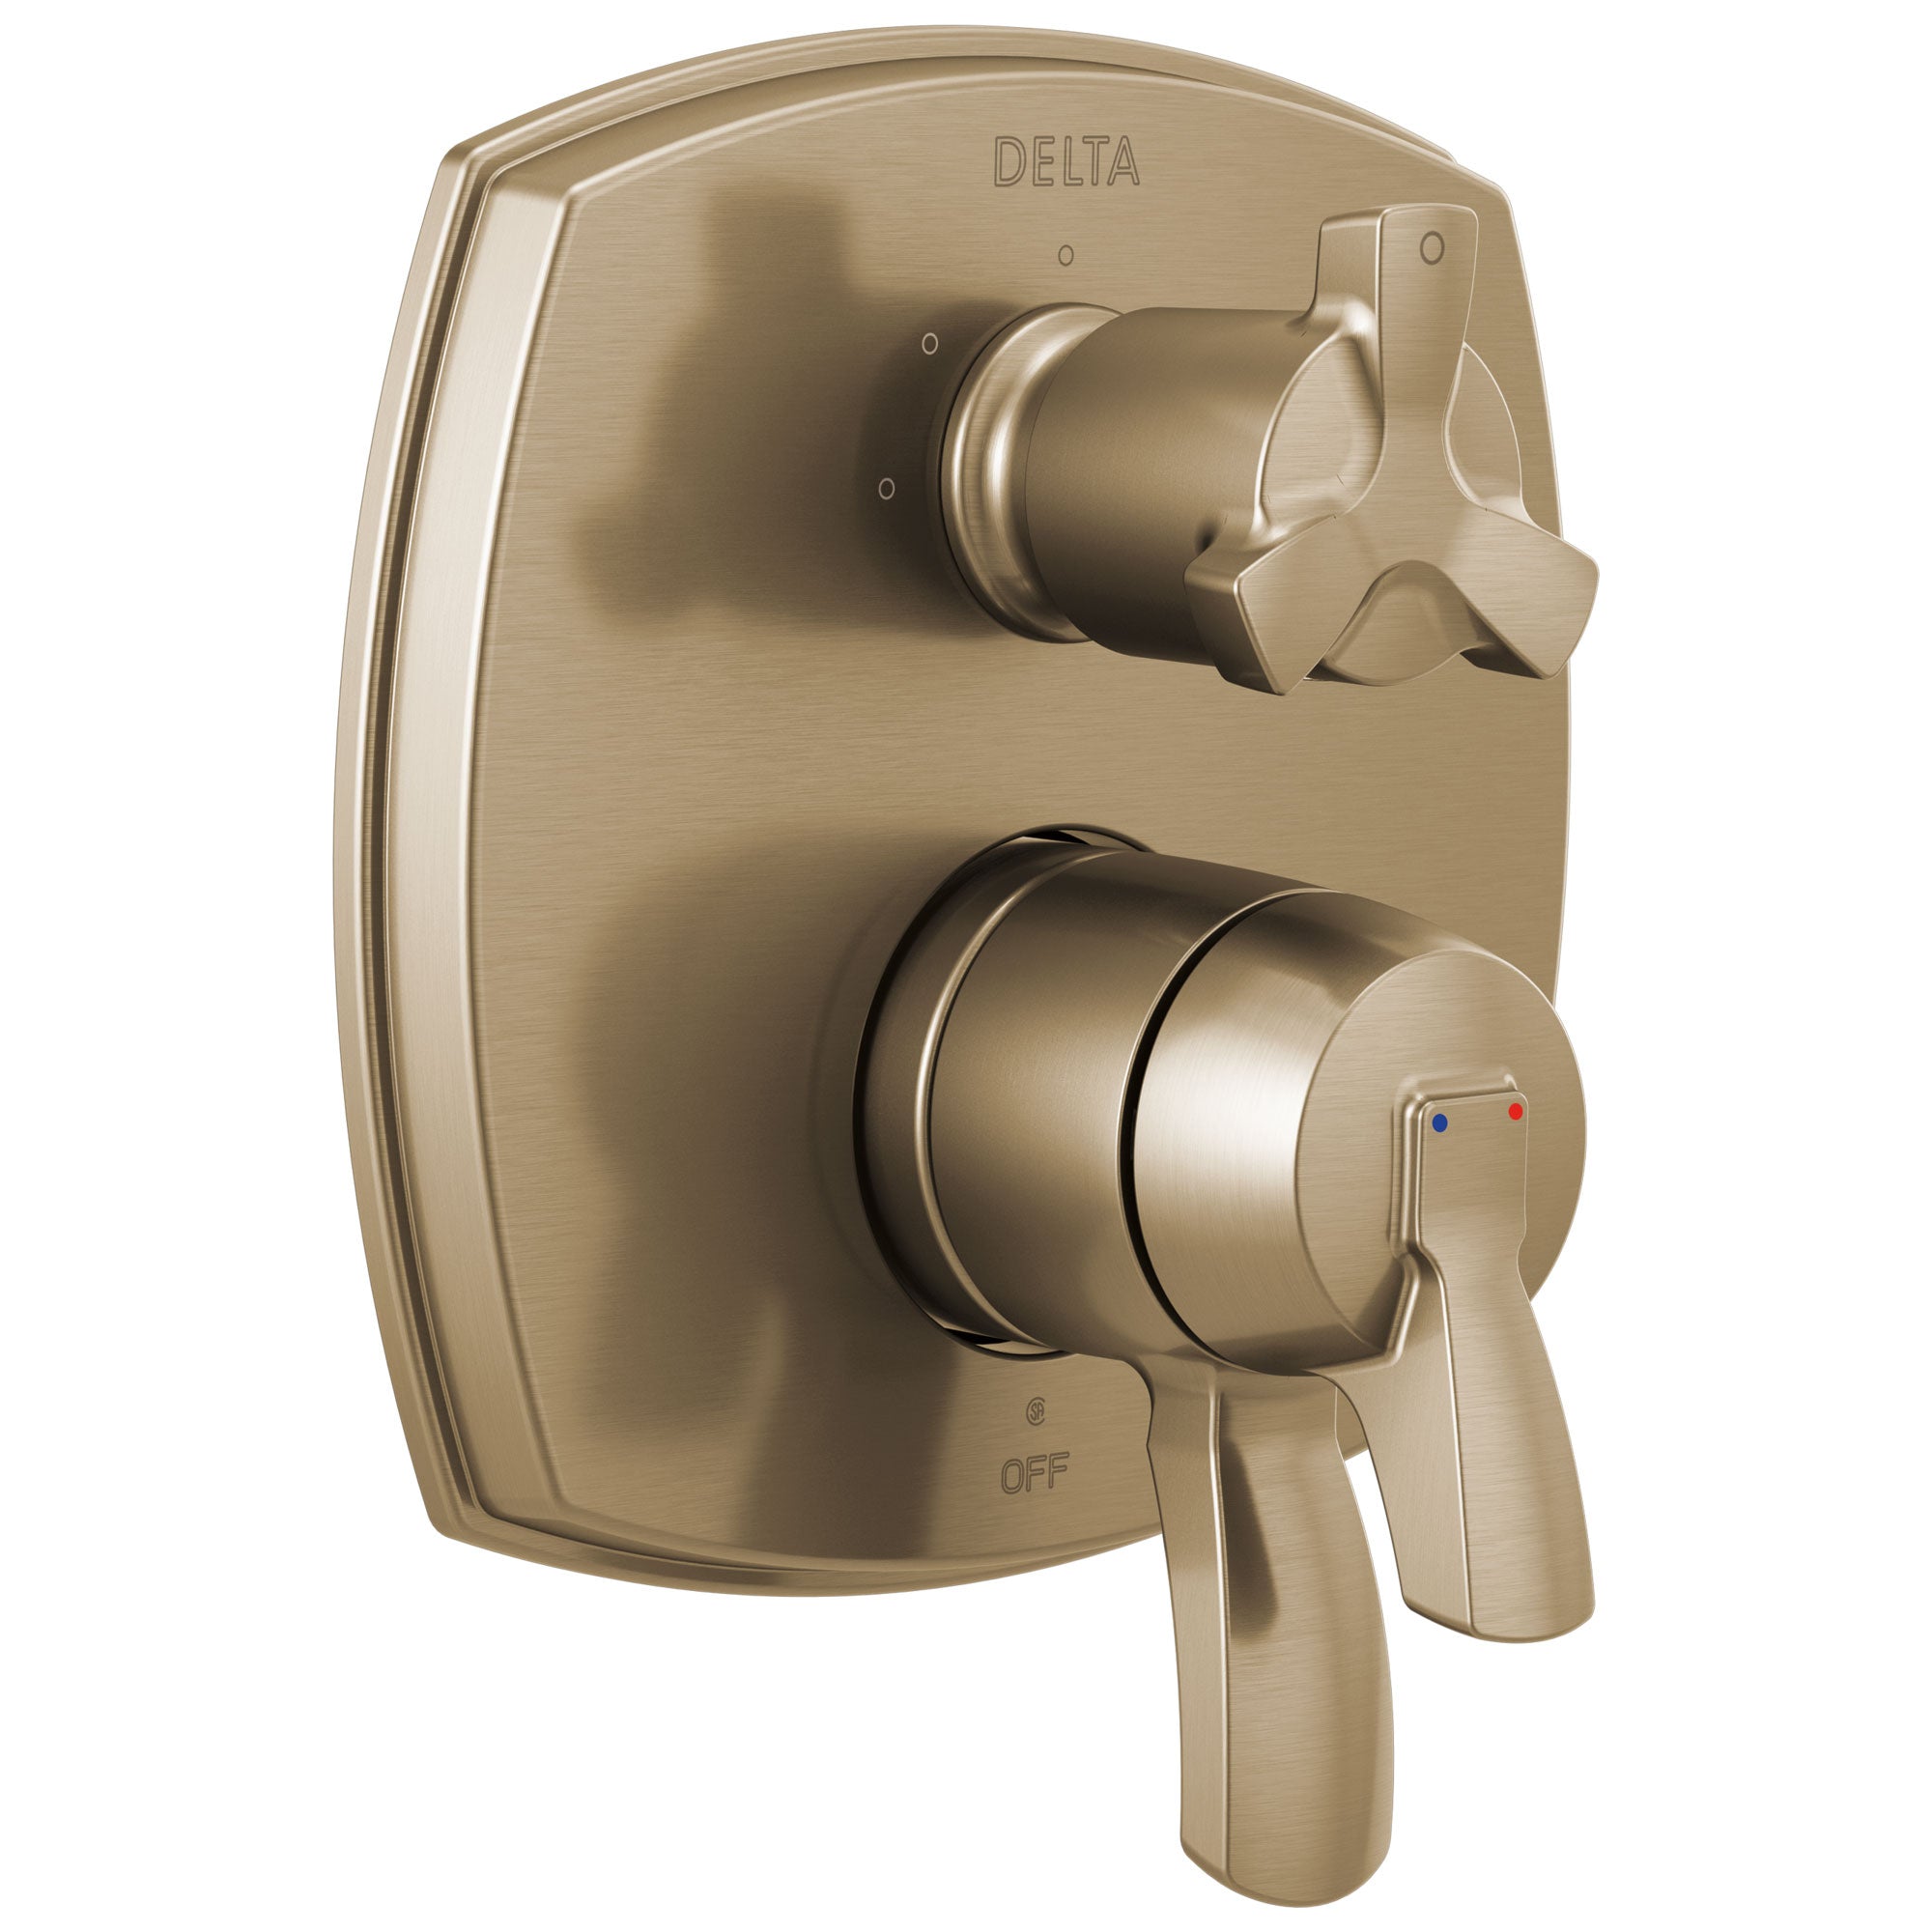 Delta Stryke Champagne Bronze Finish 17 Series Integrated 3-Function Cross Handle Diverter Shower System Control Includes Valve and Handles D3730V